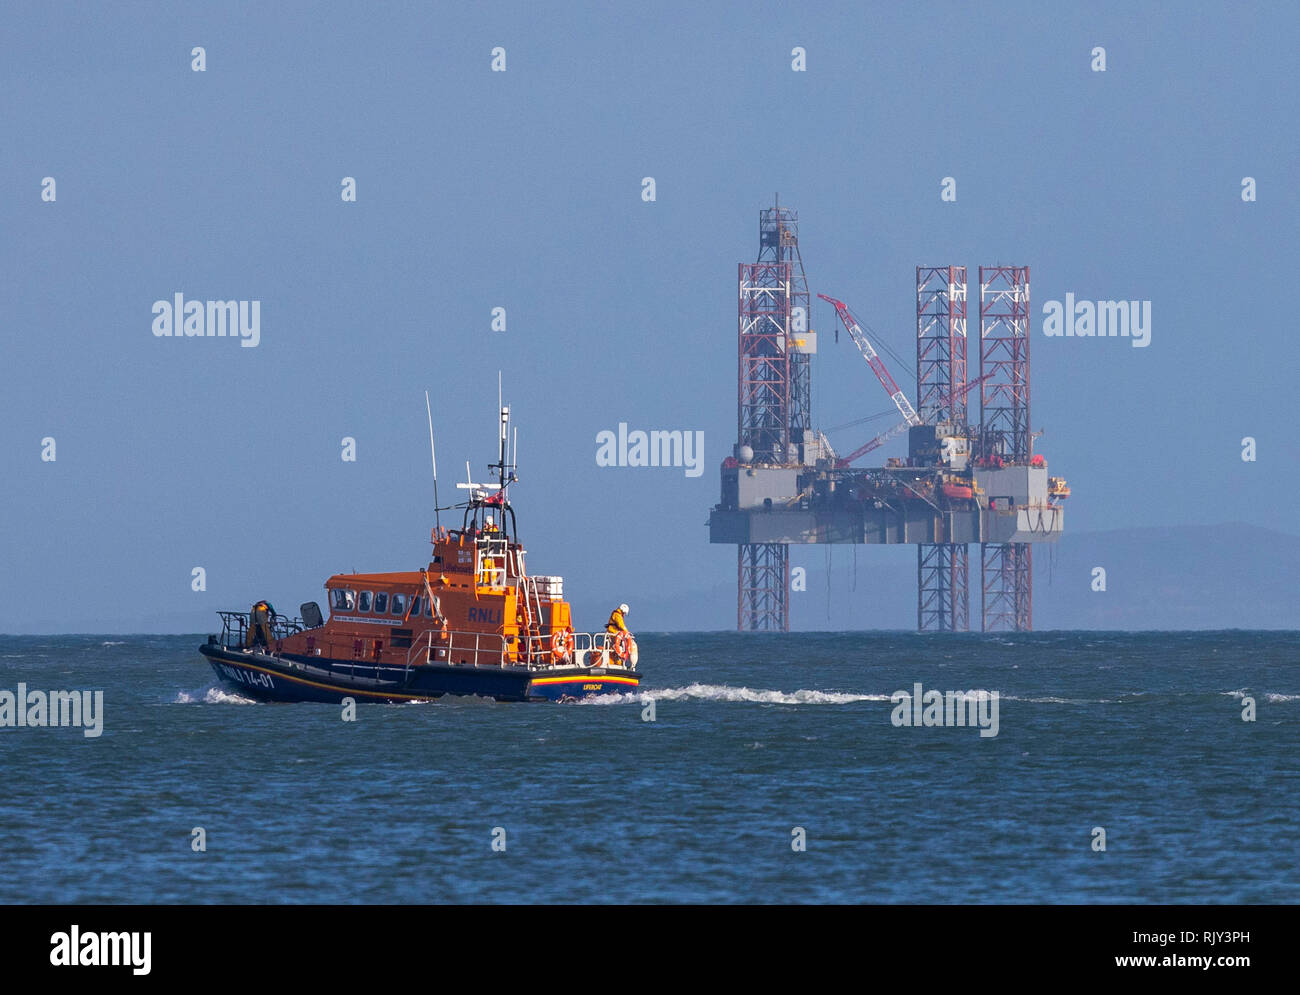 A Lifeboat Passes The Ensco 72 Drilling Rig In Poole Bay